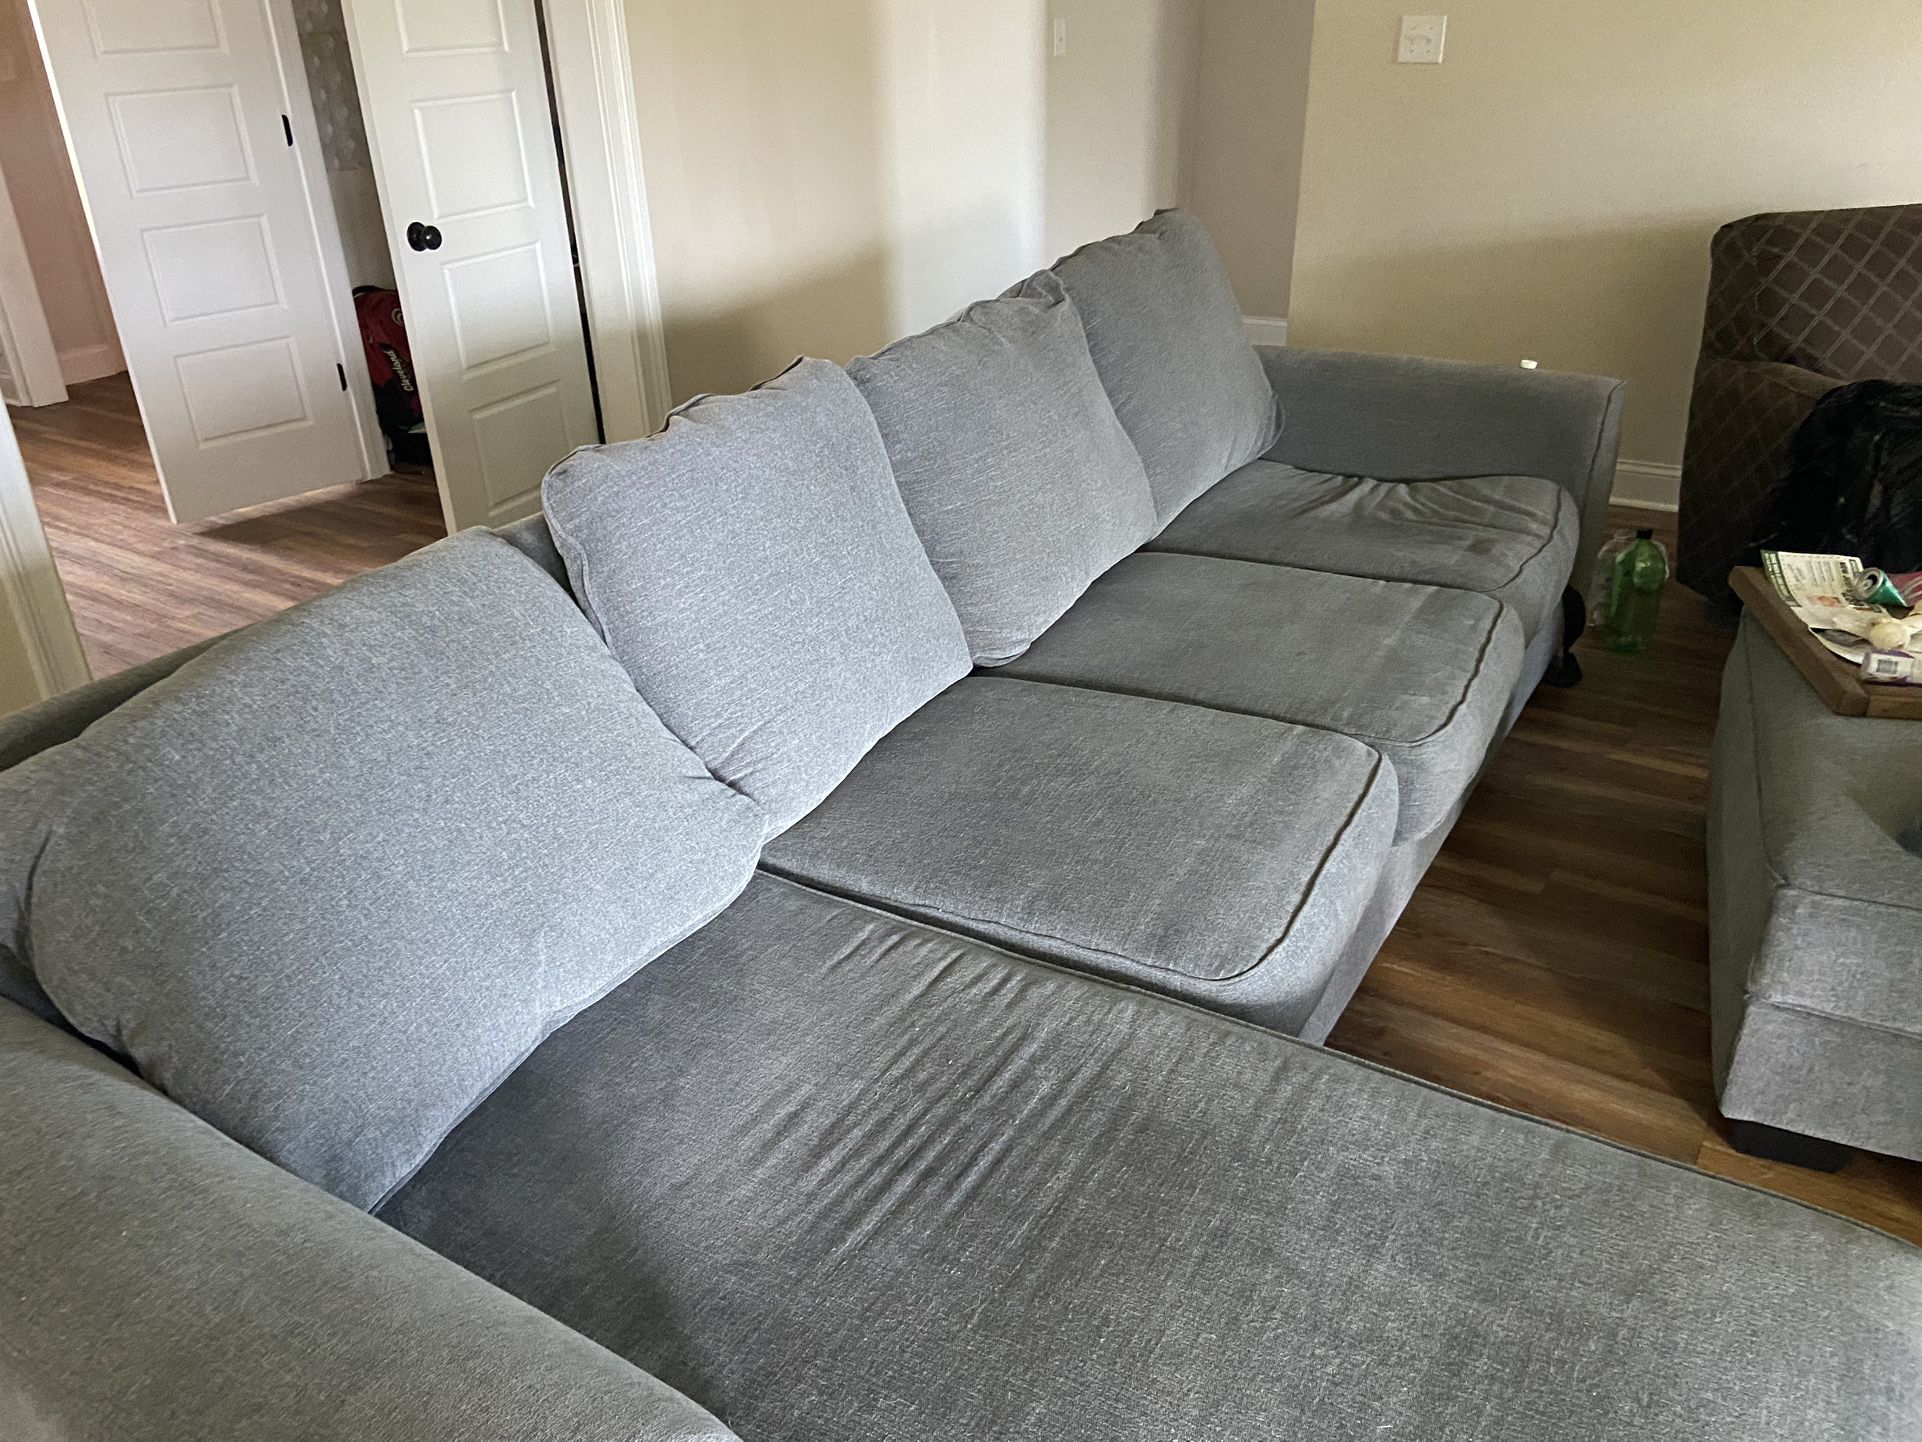 Large Couch and Ottoman  MAKE AN OFFER